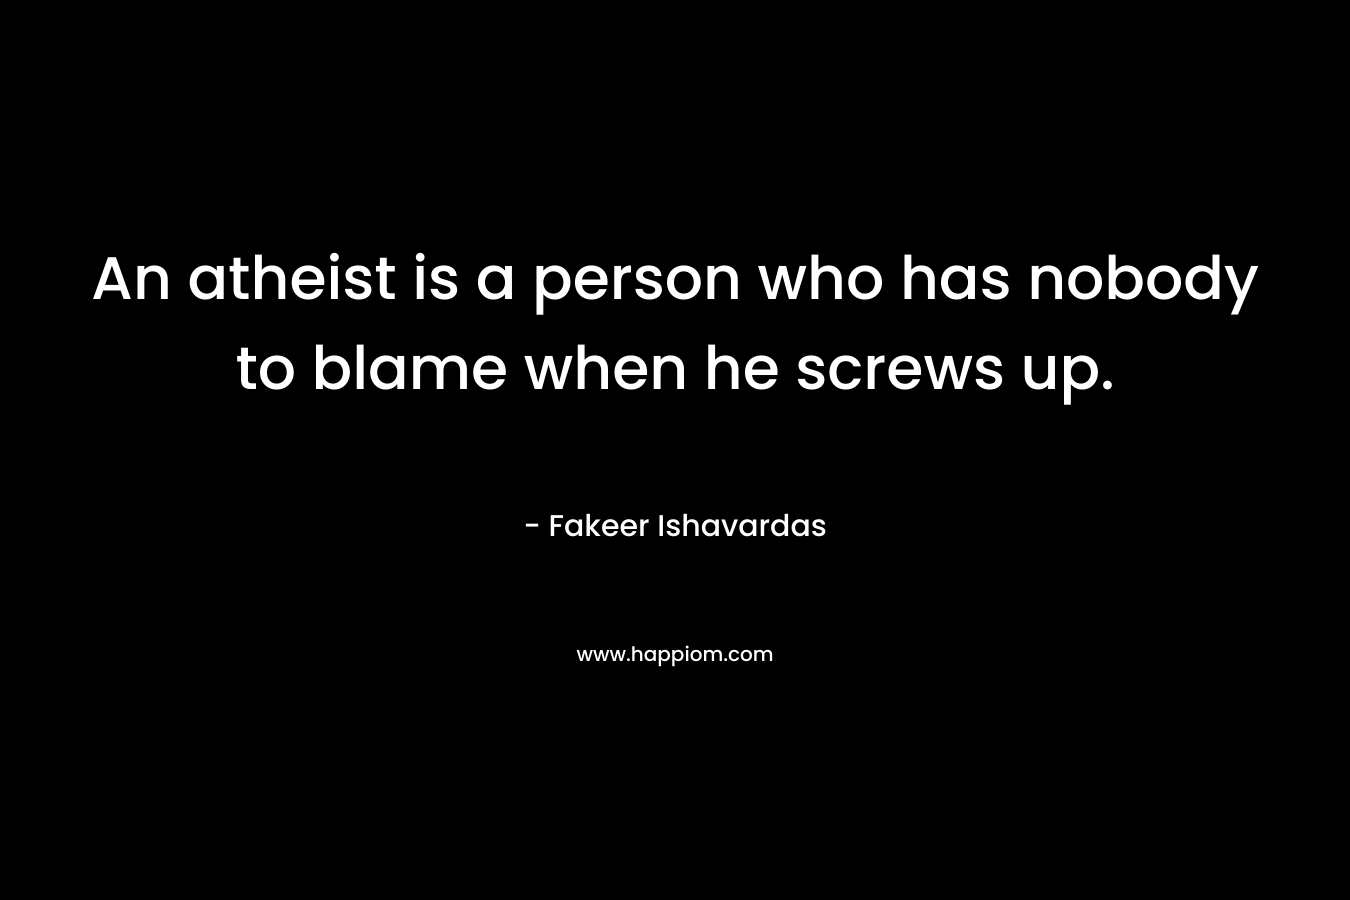 An atheist is a person who has nobody to blame when he screws up.